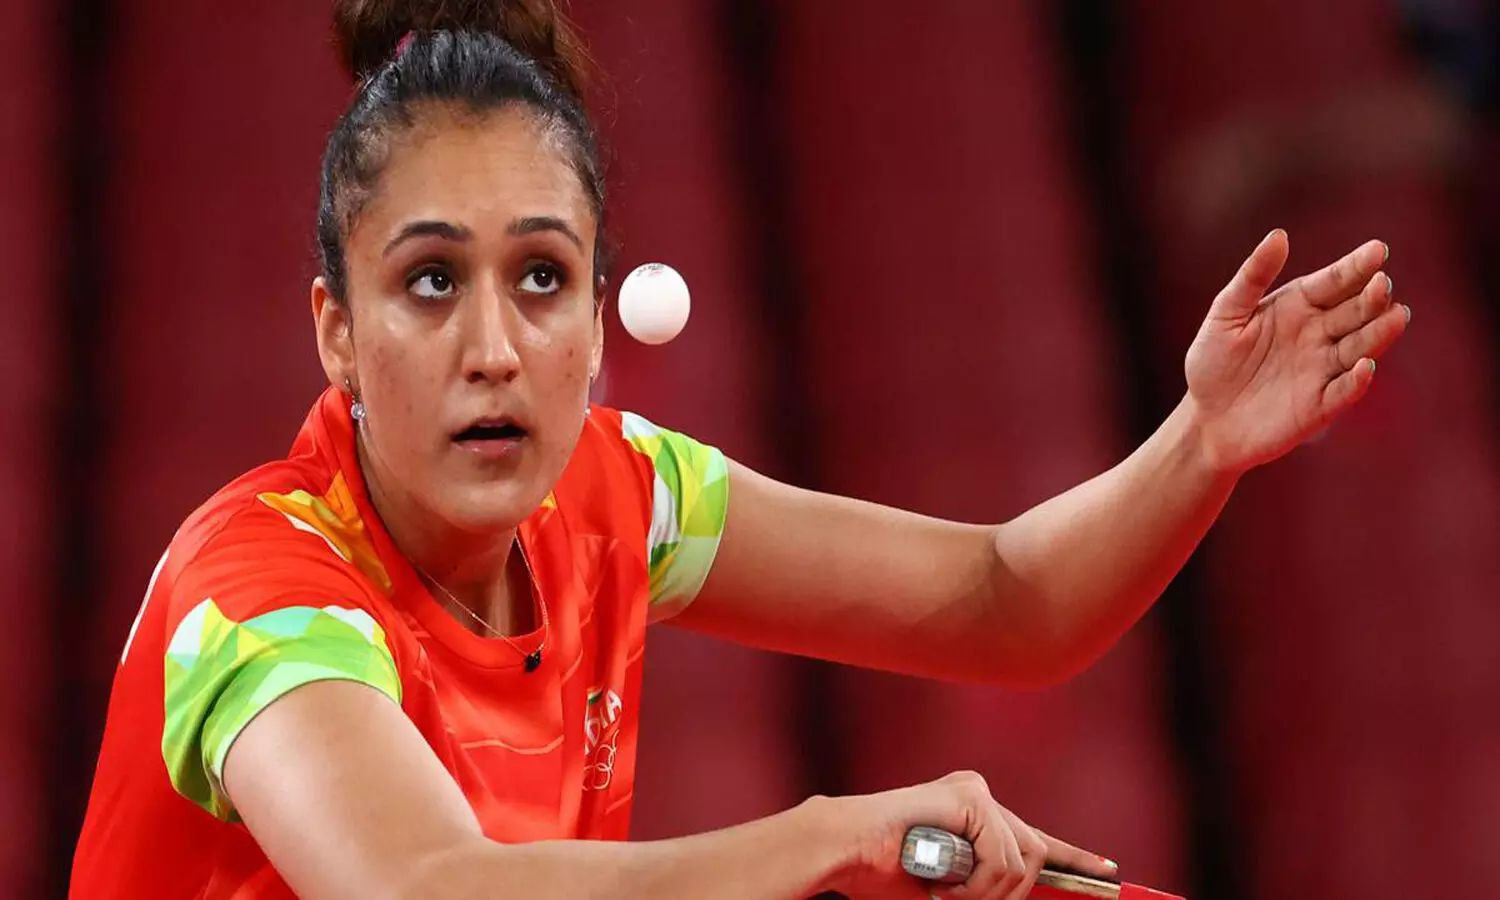 Manika Batra in tears as she gets knocked out